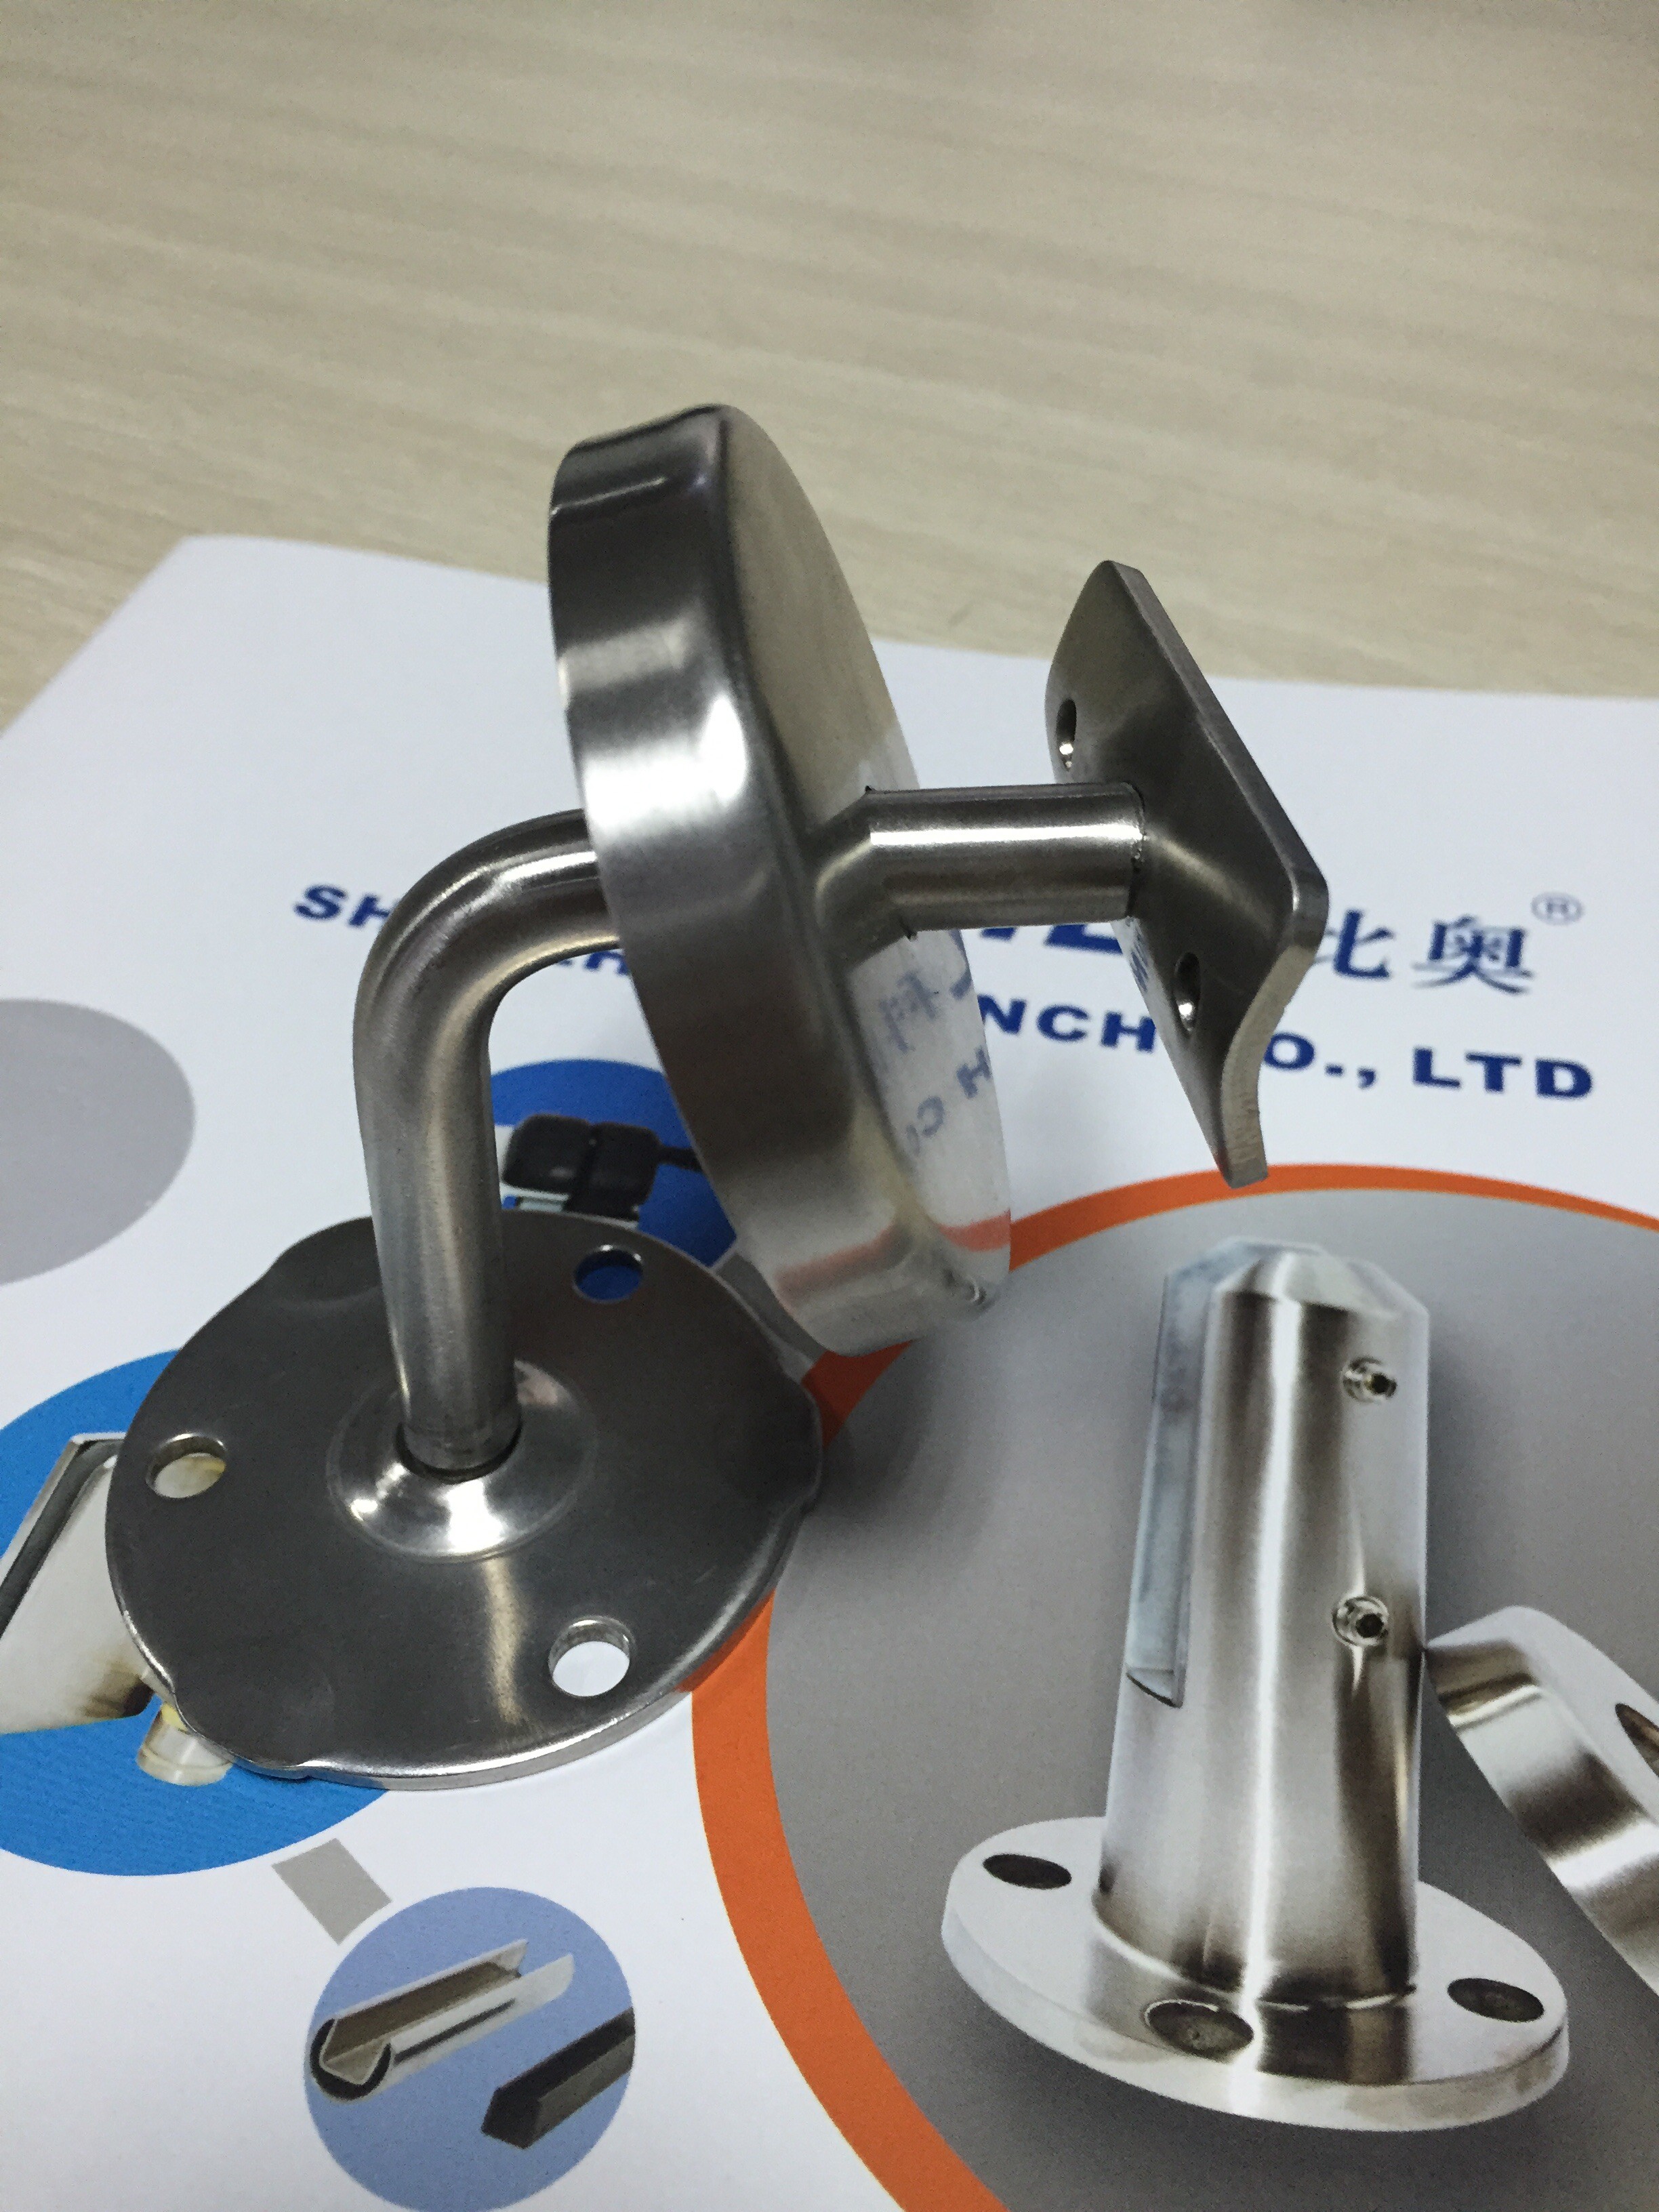 Balustrade wall mounting handrail bracket made in stainless steel 316